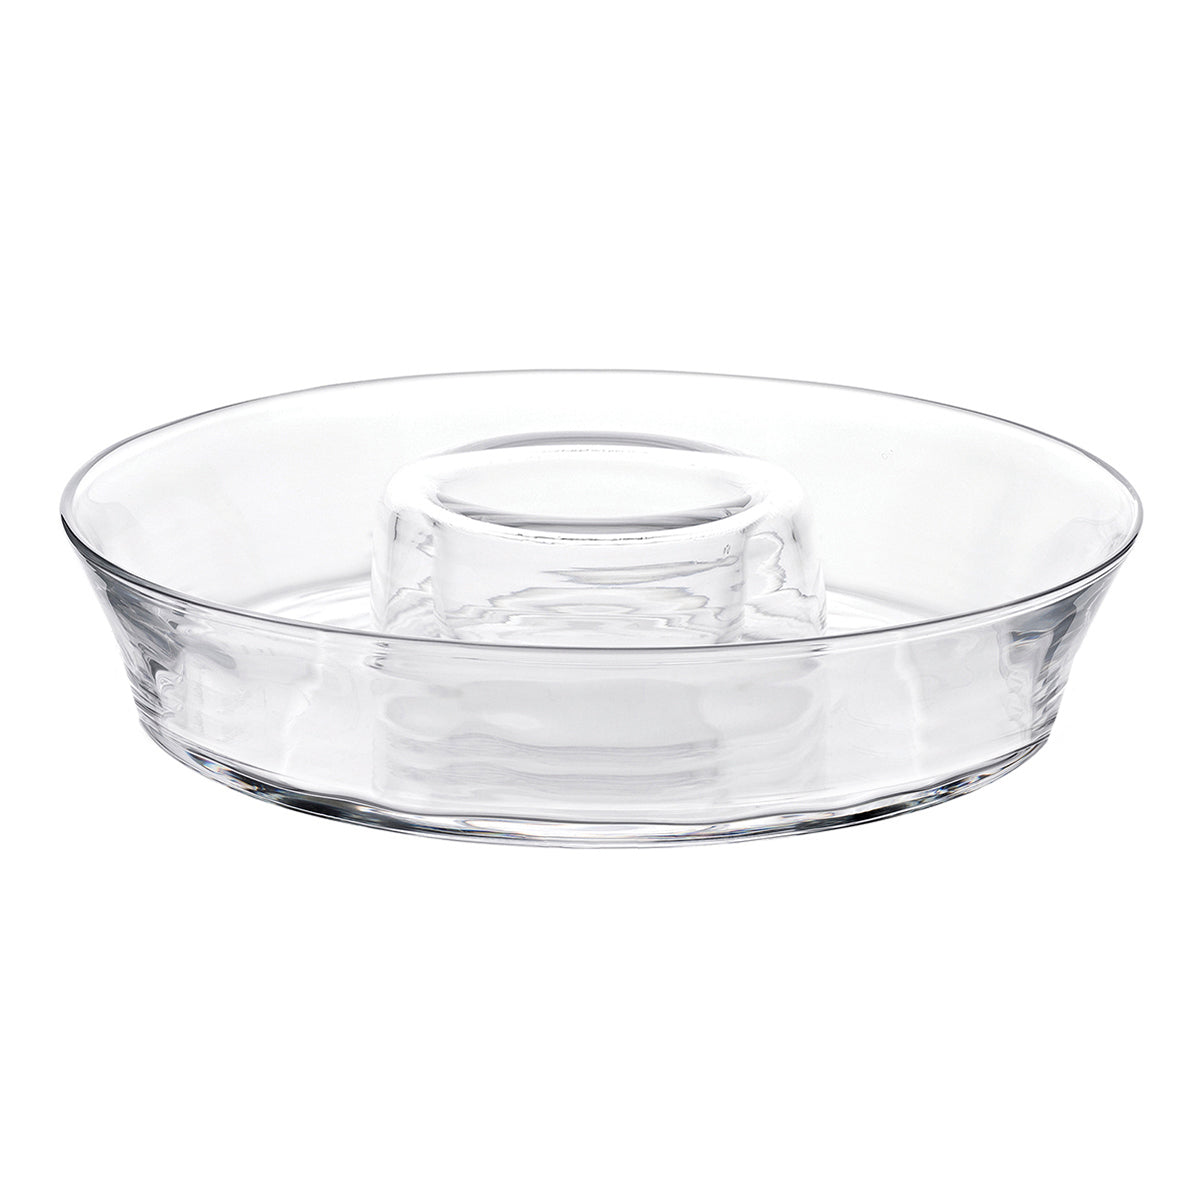 Keep it chic with this chip and dip server that elevates the humble to something a bit more special. Simple, textural lines in handsome mouth-blown glass, this piece allows you to easily present your favorite chips and dips with a splash of elegance. 